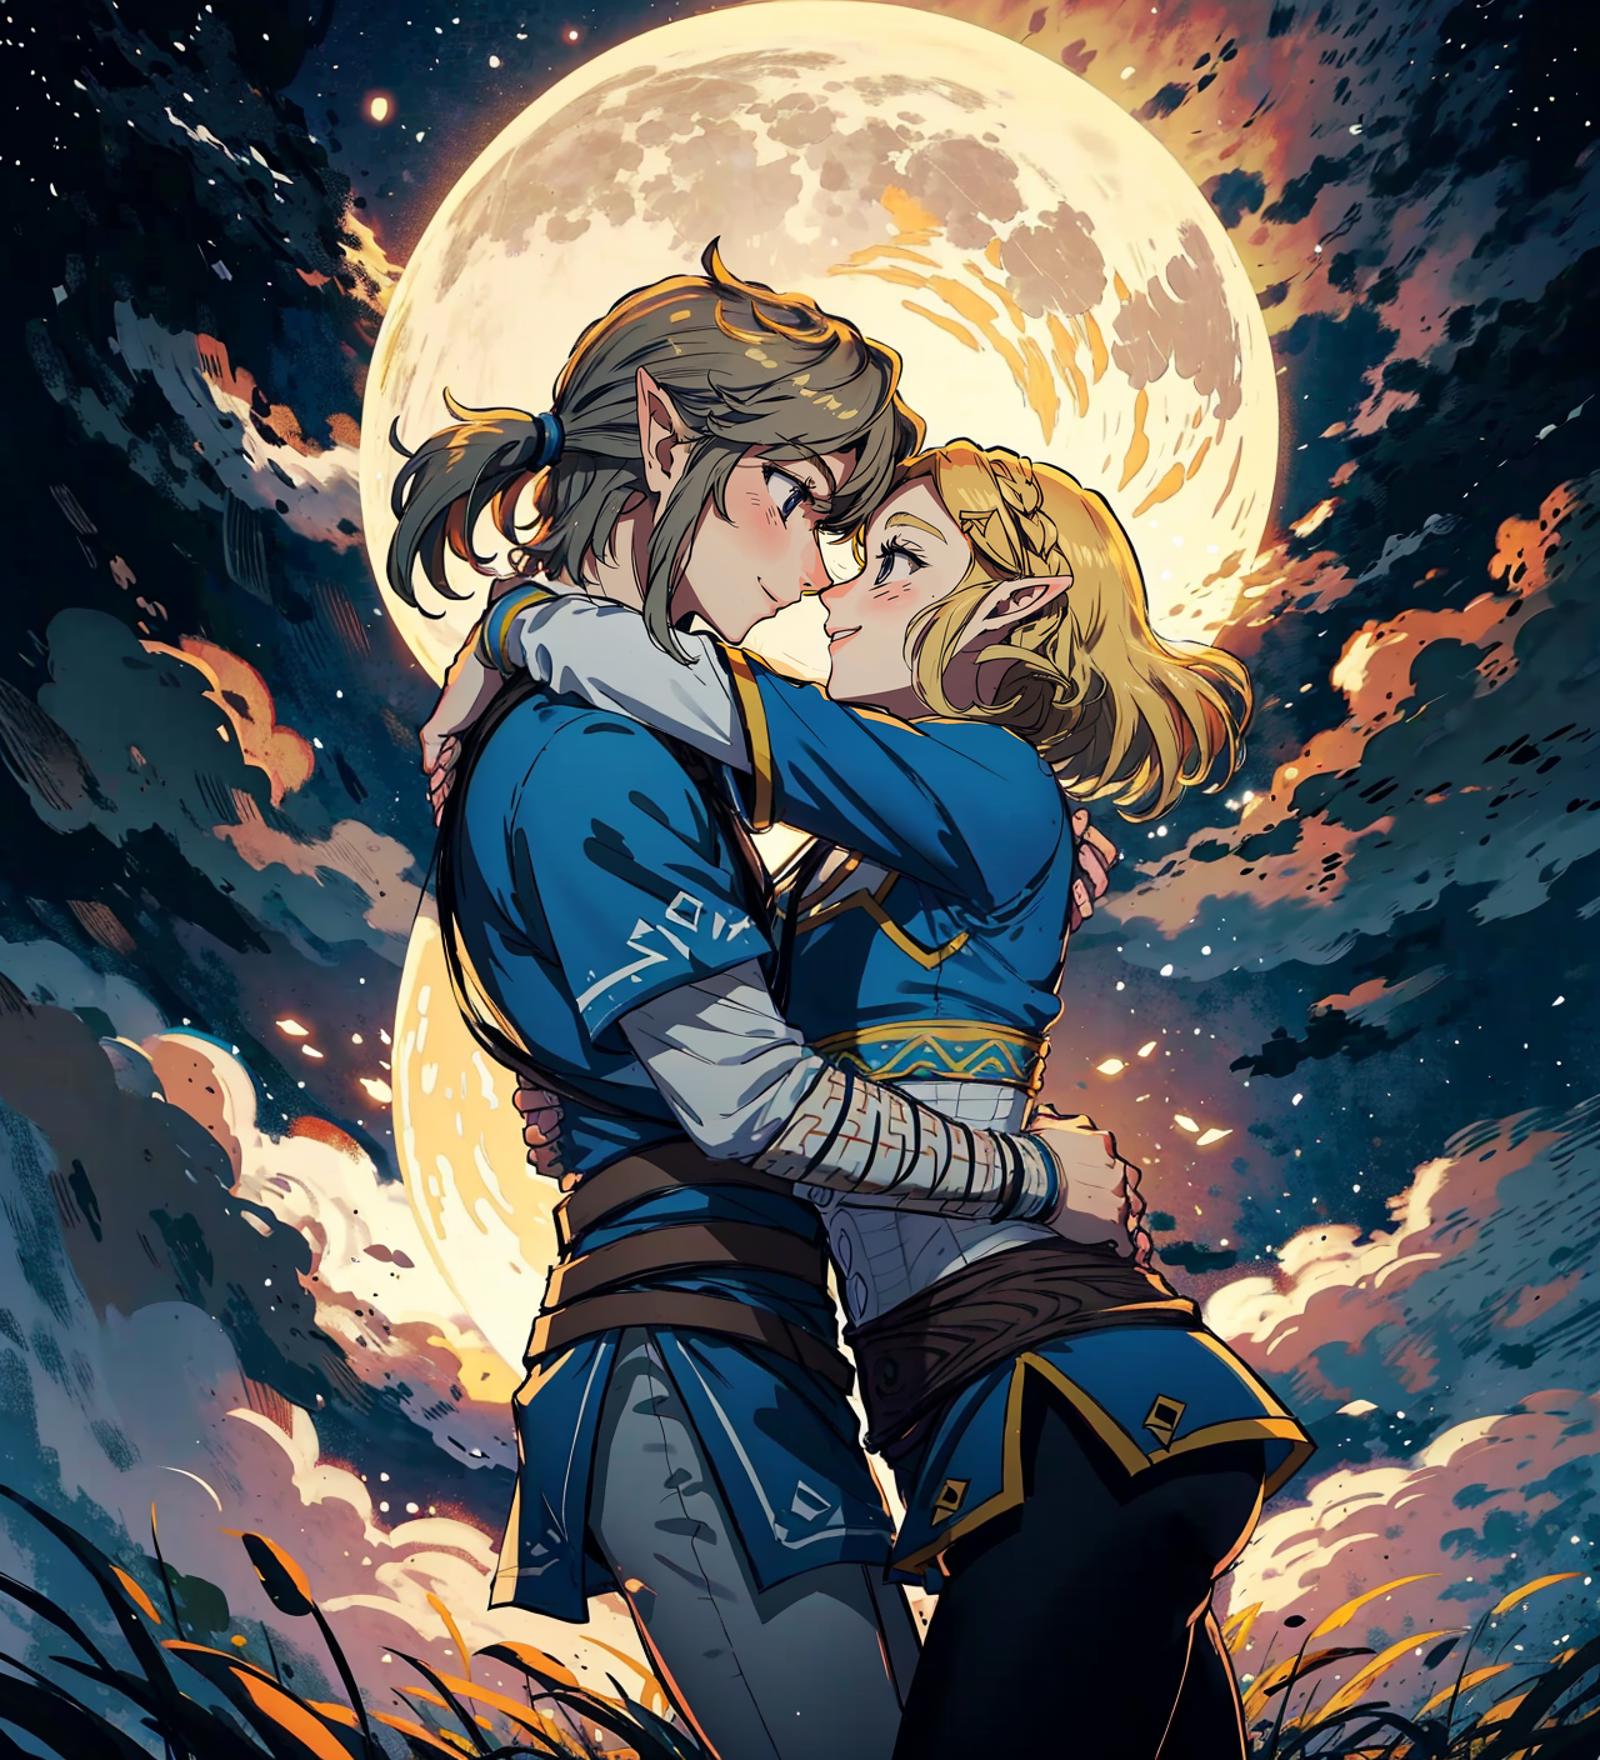 A Moonlit Night: Two Characters from the Legend of Zelda Embrace Under the Moon